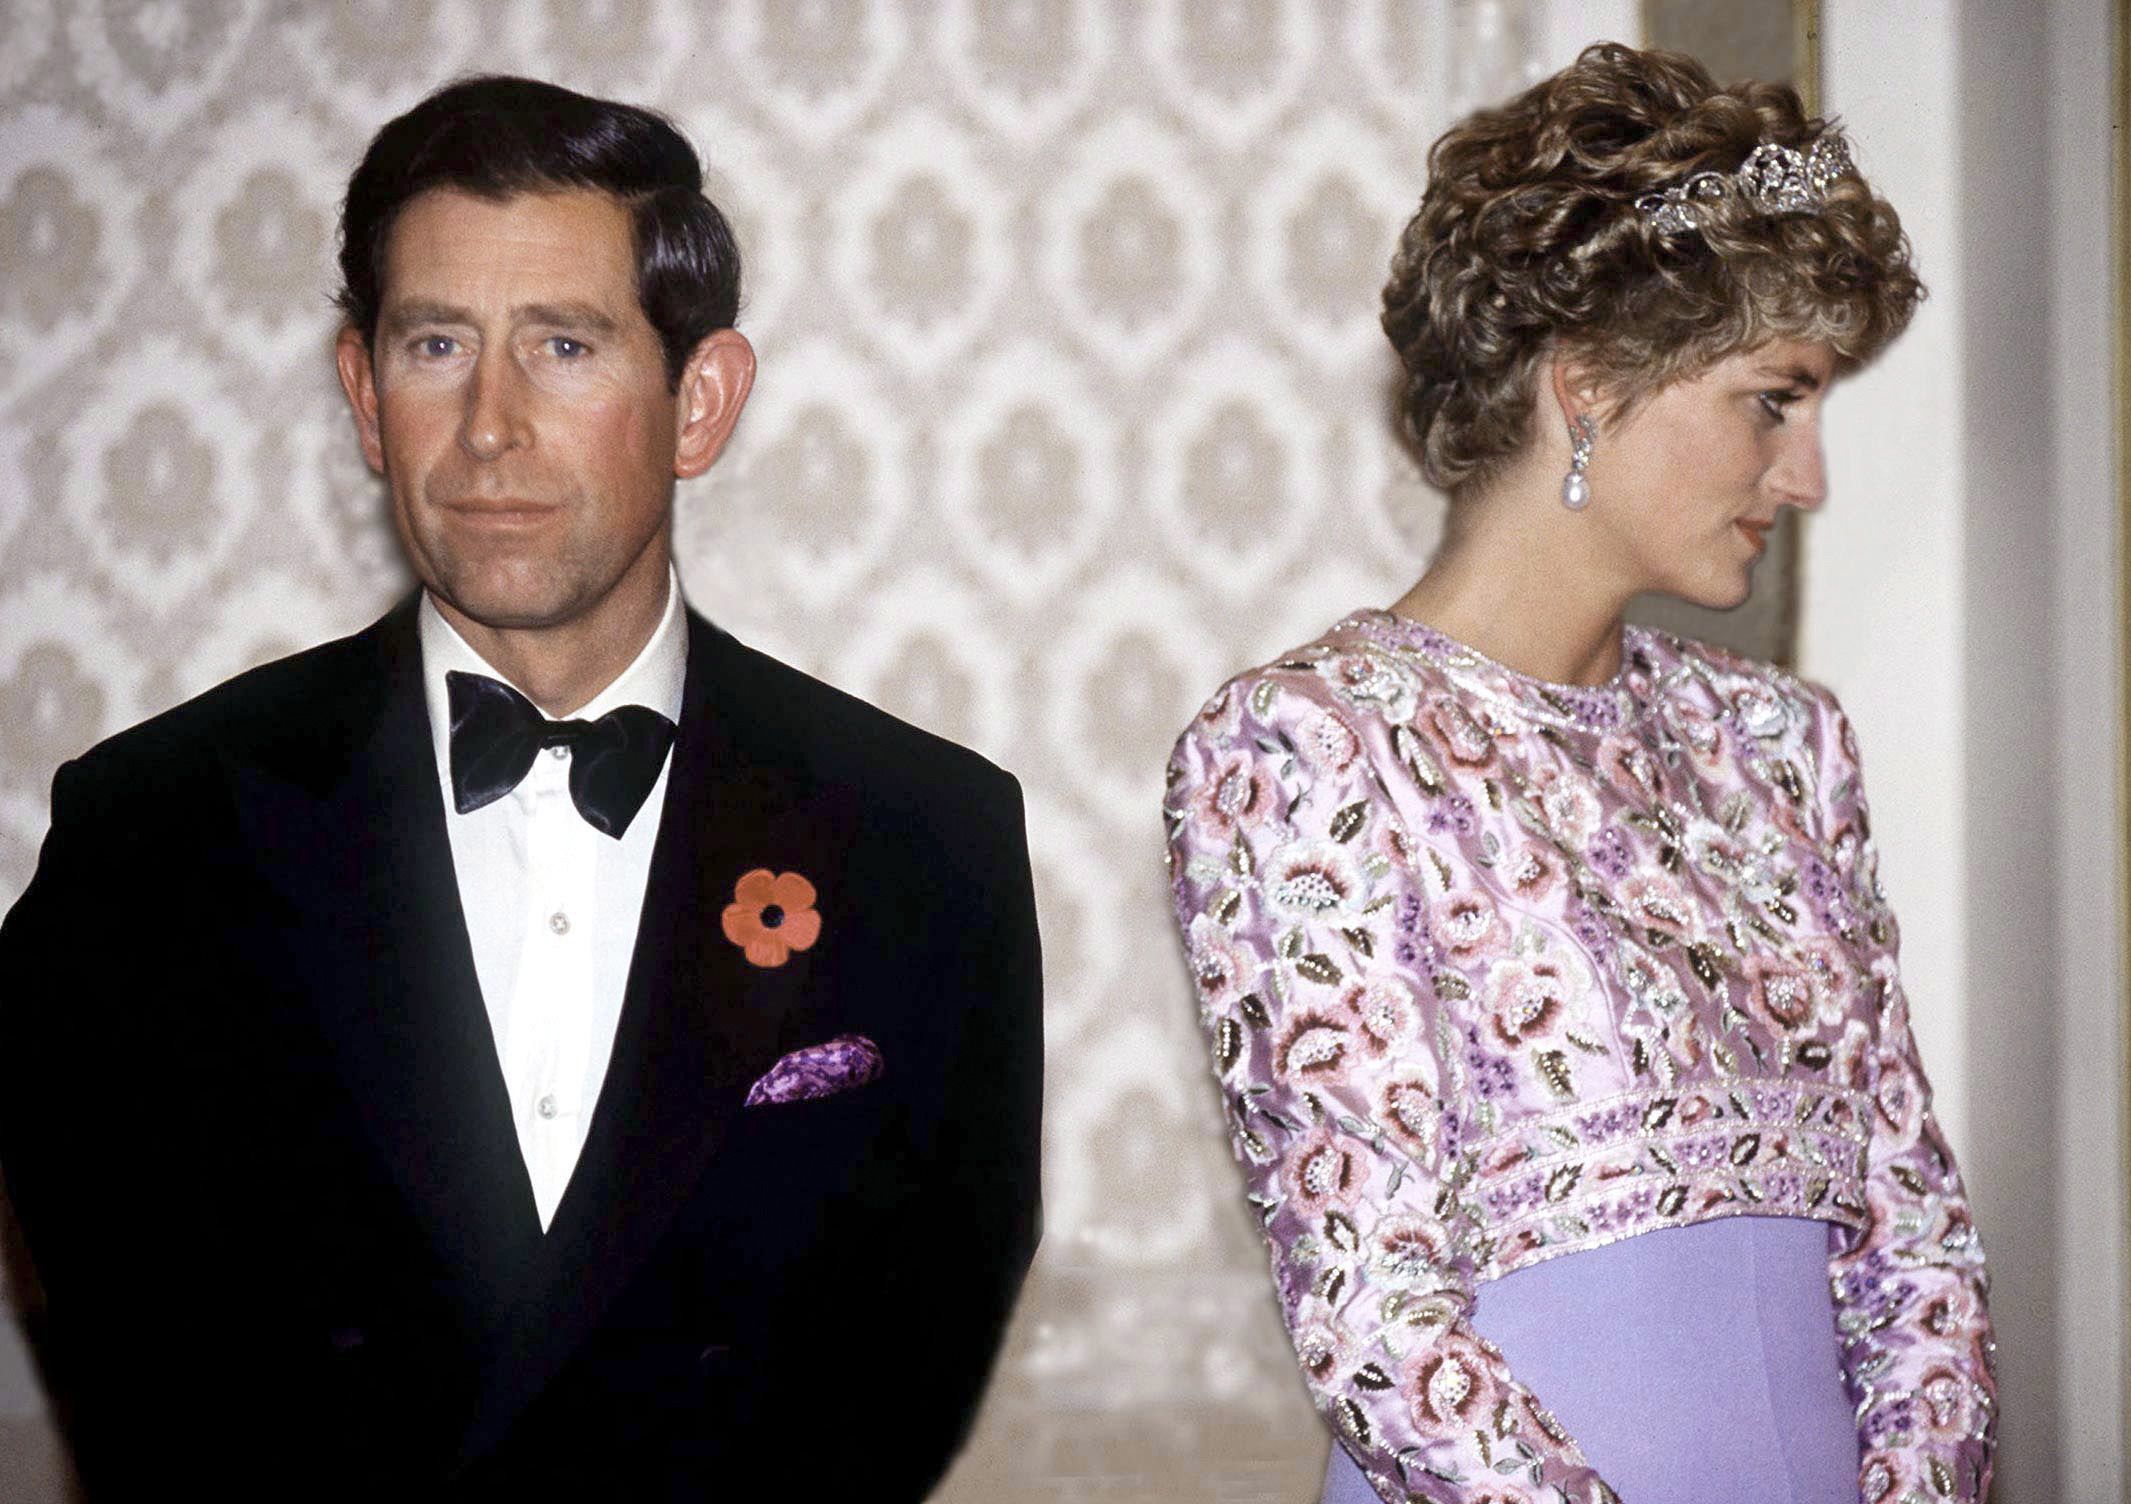 The life, death, and legacy of Princess Diana, "Princess of Wales"